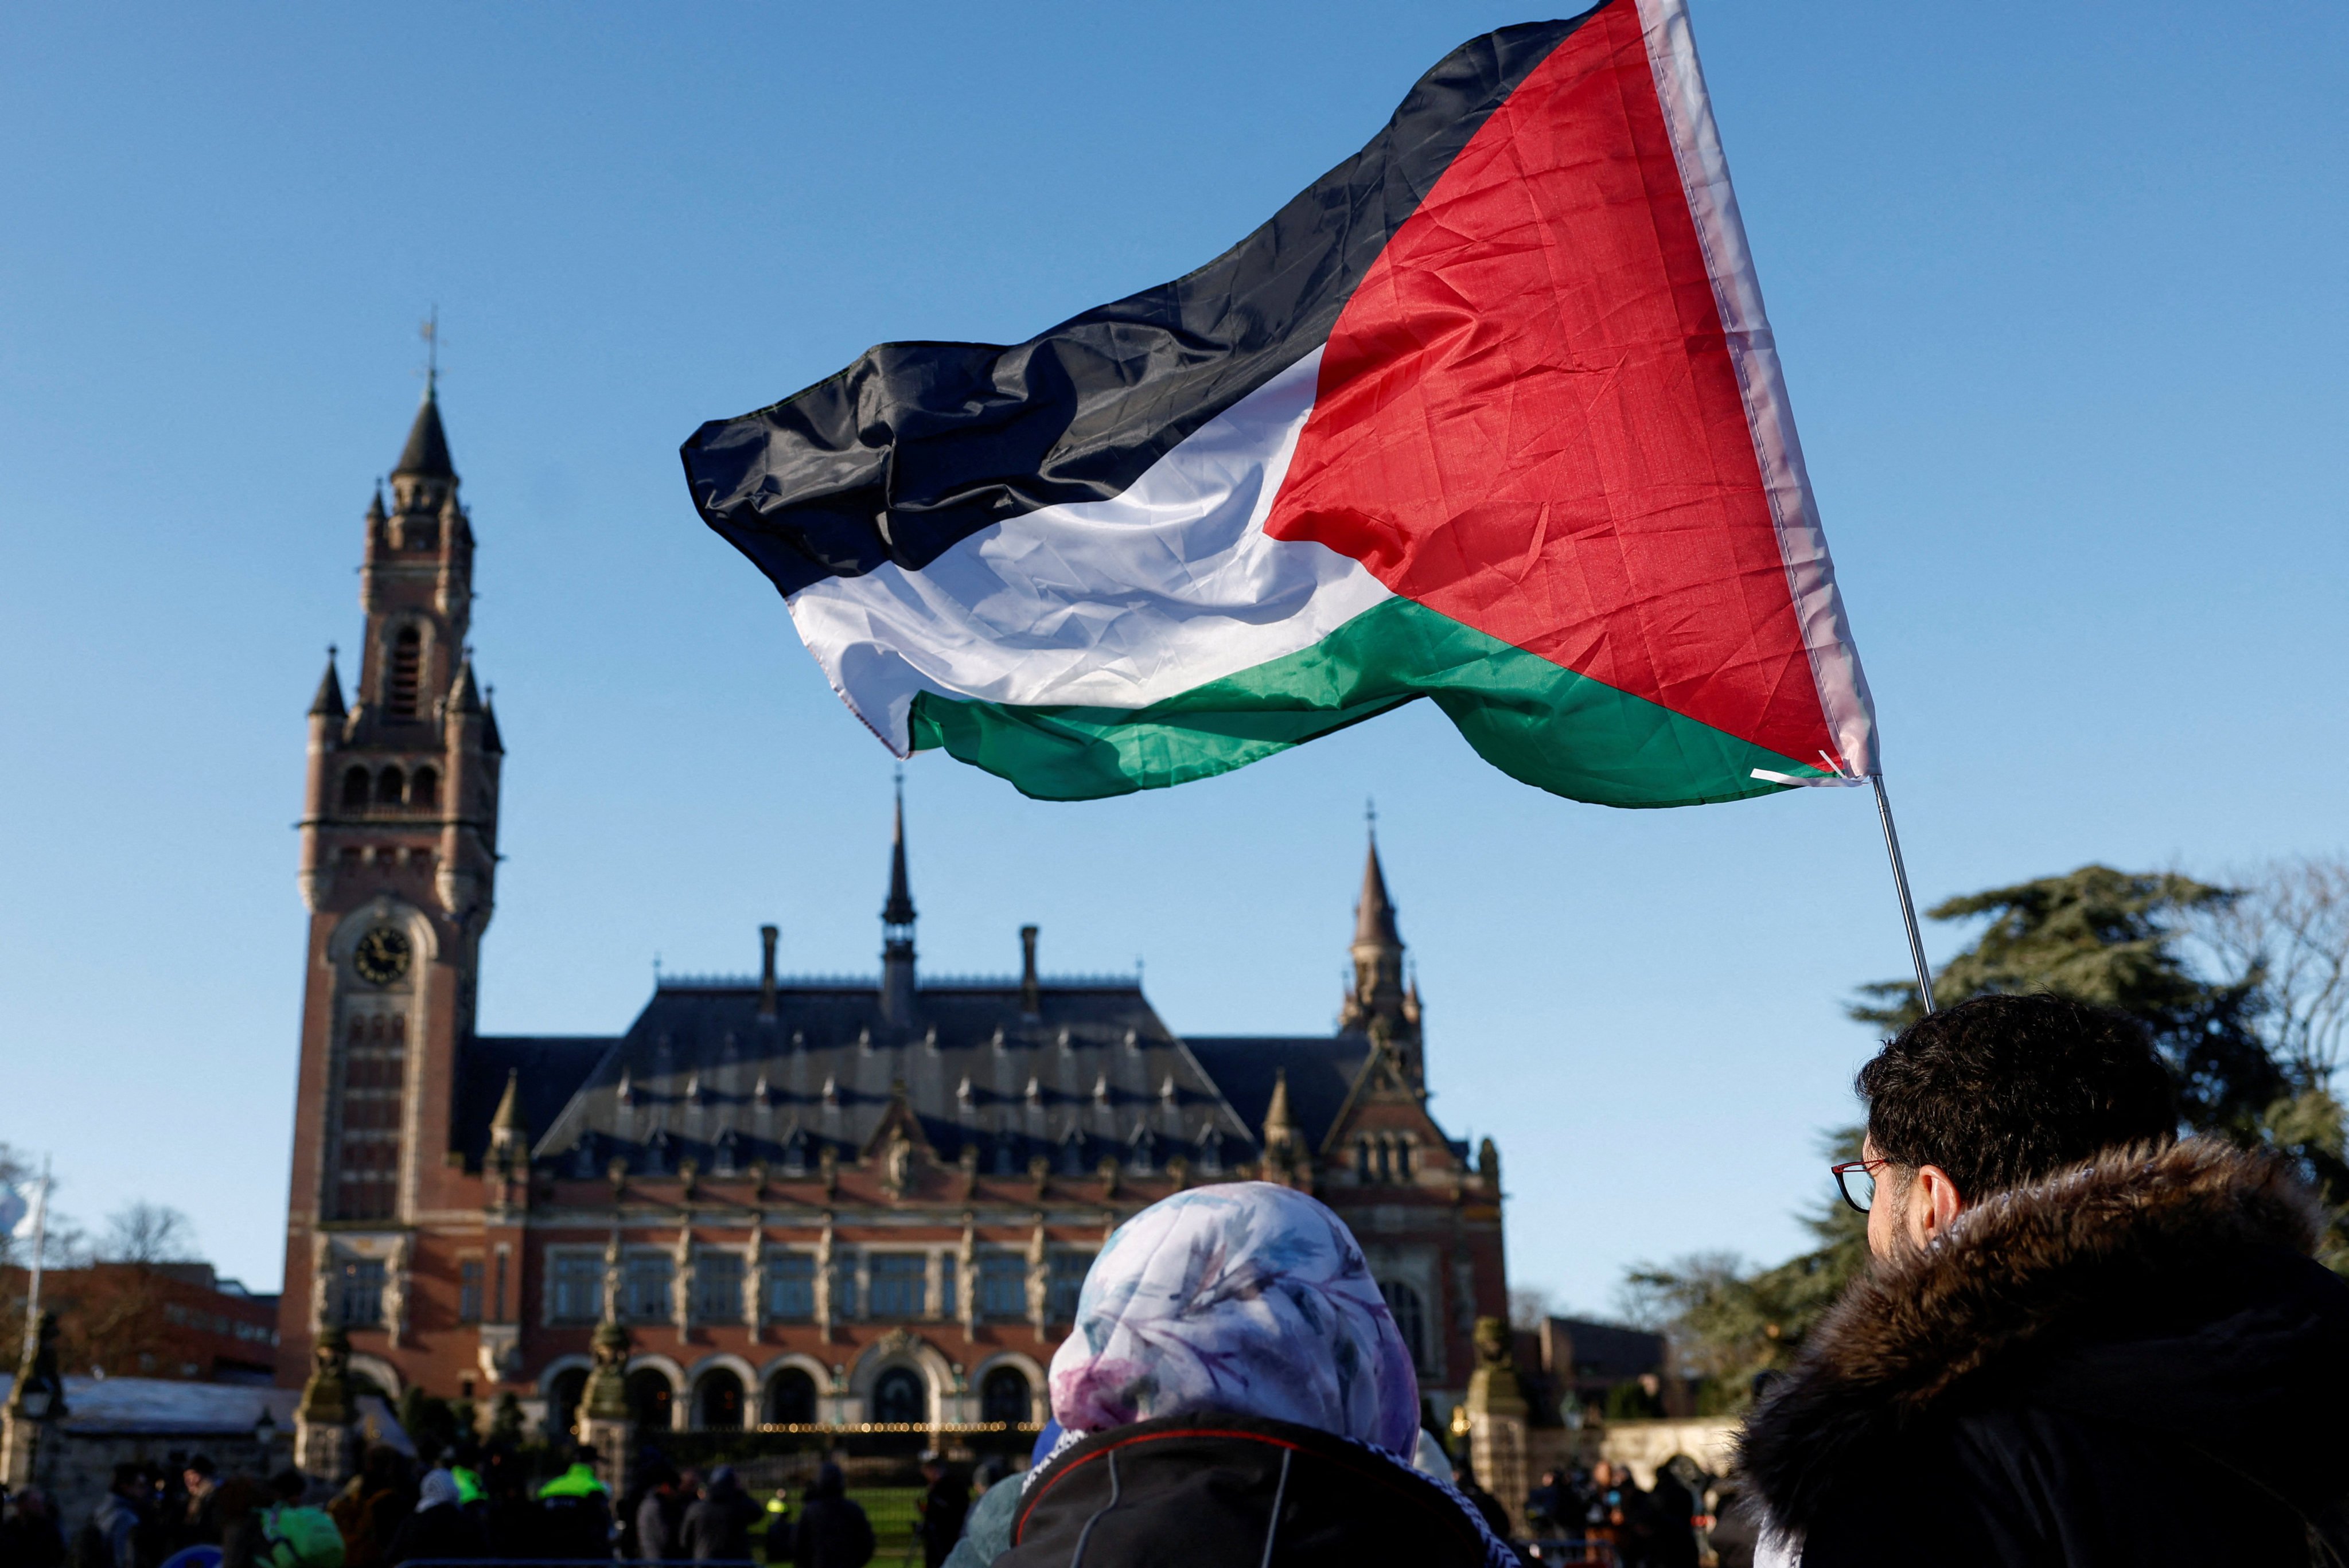 Protesters hold a Palestinian flag as they gather outside the International Court of Justice in The Hague, Netherlands. Photo: Reuters